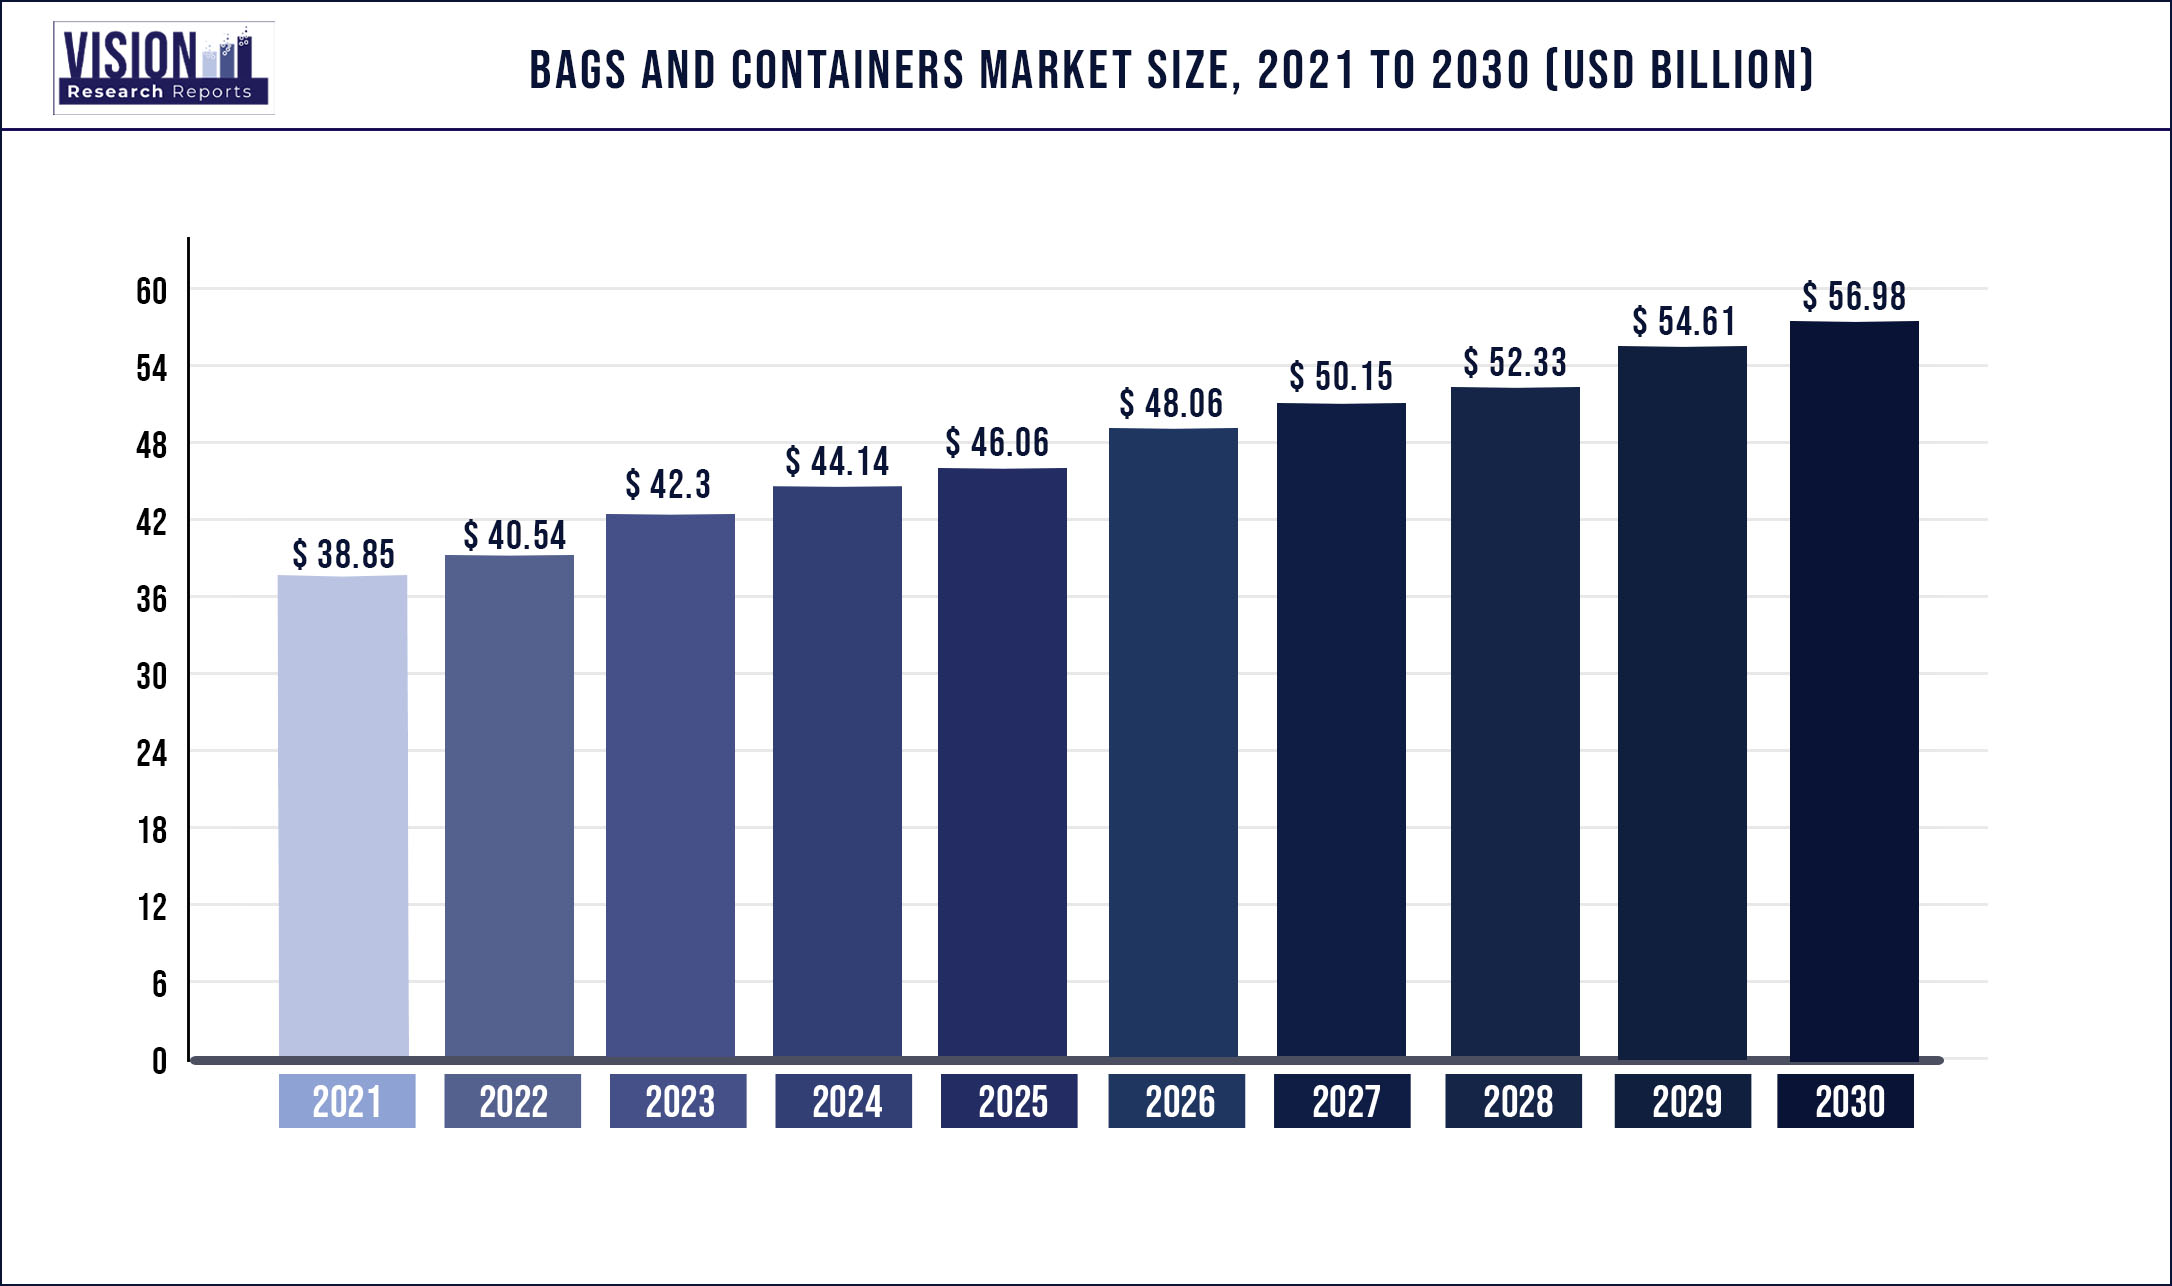 Bags And Containers Market Size 2021 to 2030